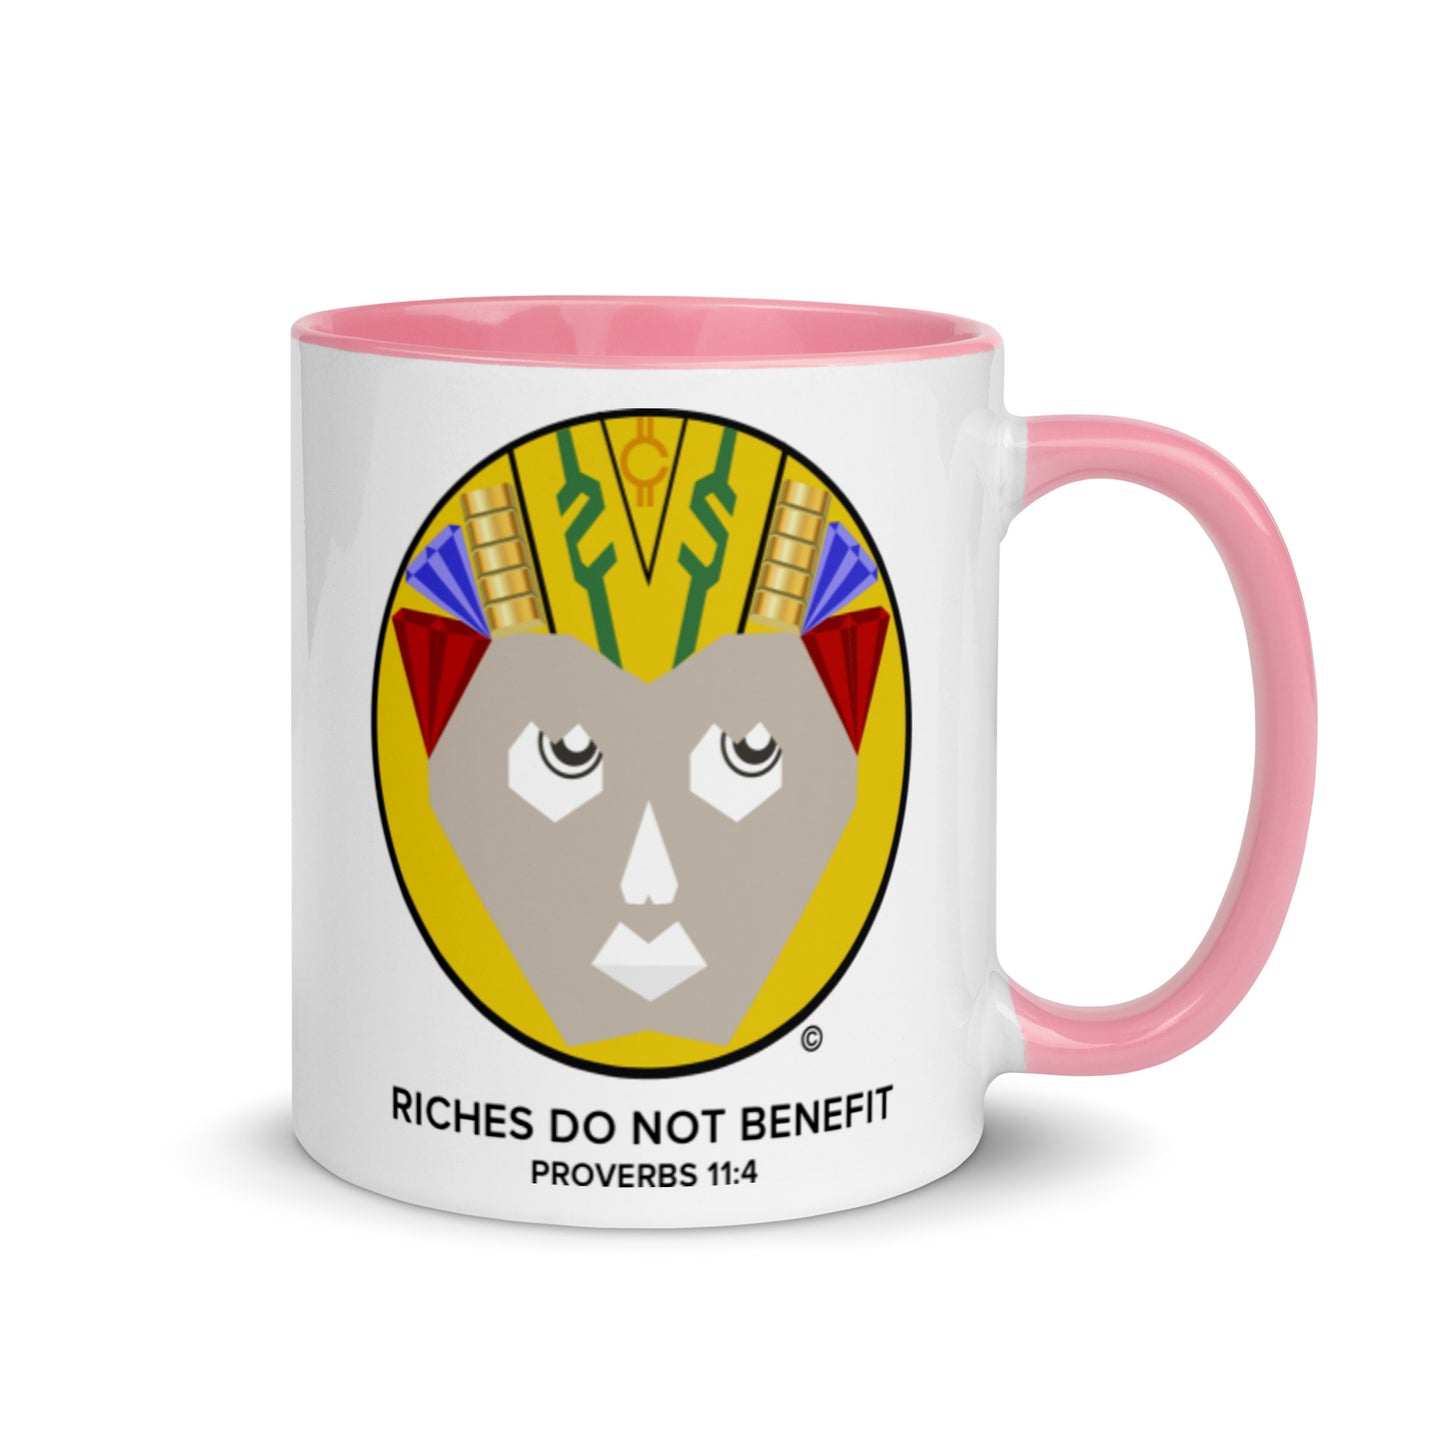 Riches Do Not Benefit Mug with Color Inside